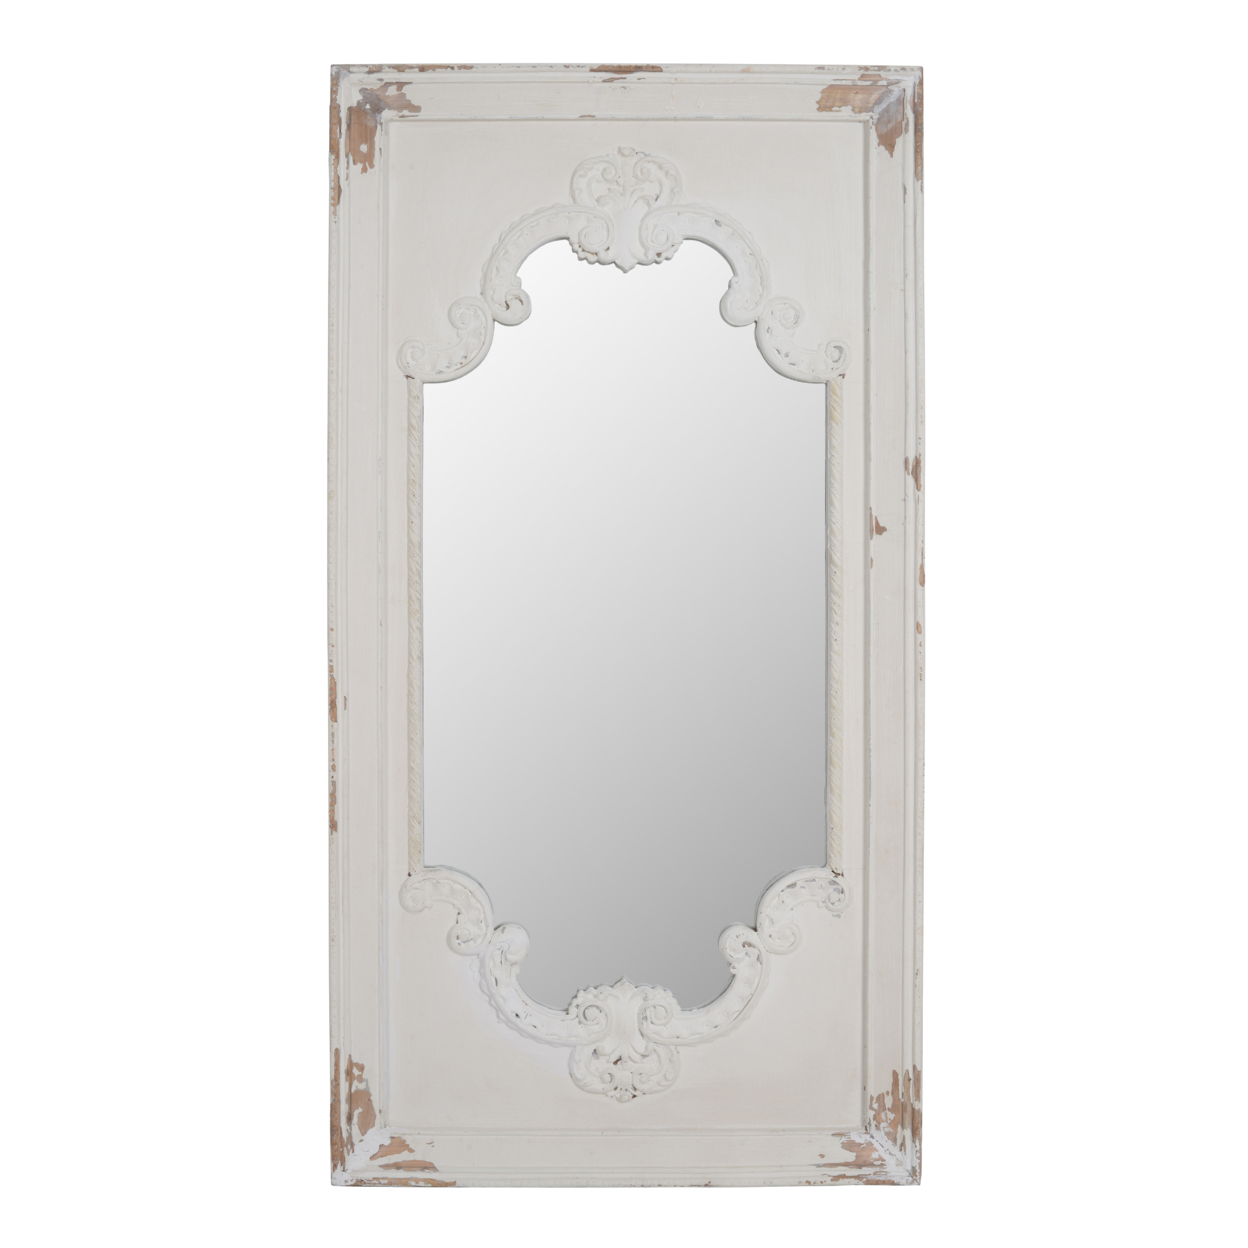 Wooden Rectangle Wall Mirror With Chipped Edges And Hook, White- Saltoro Sherpi